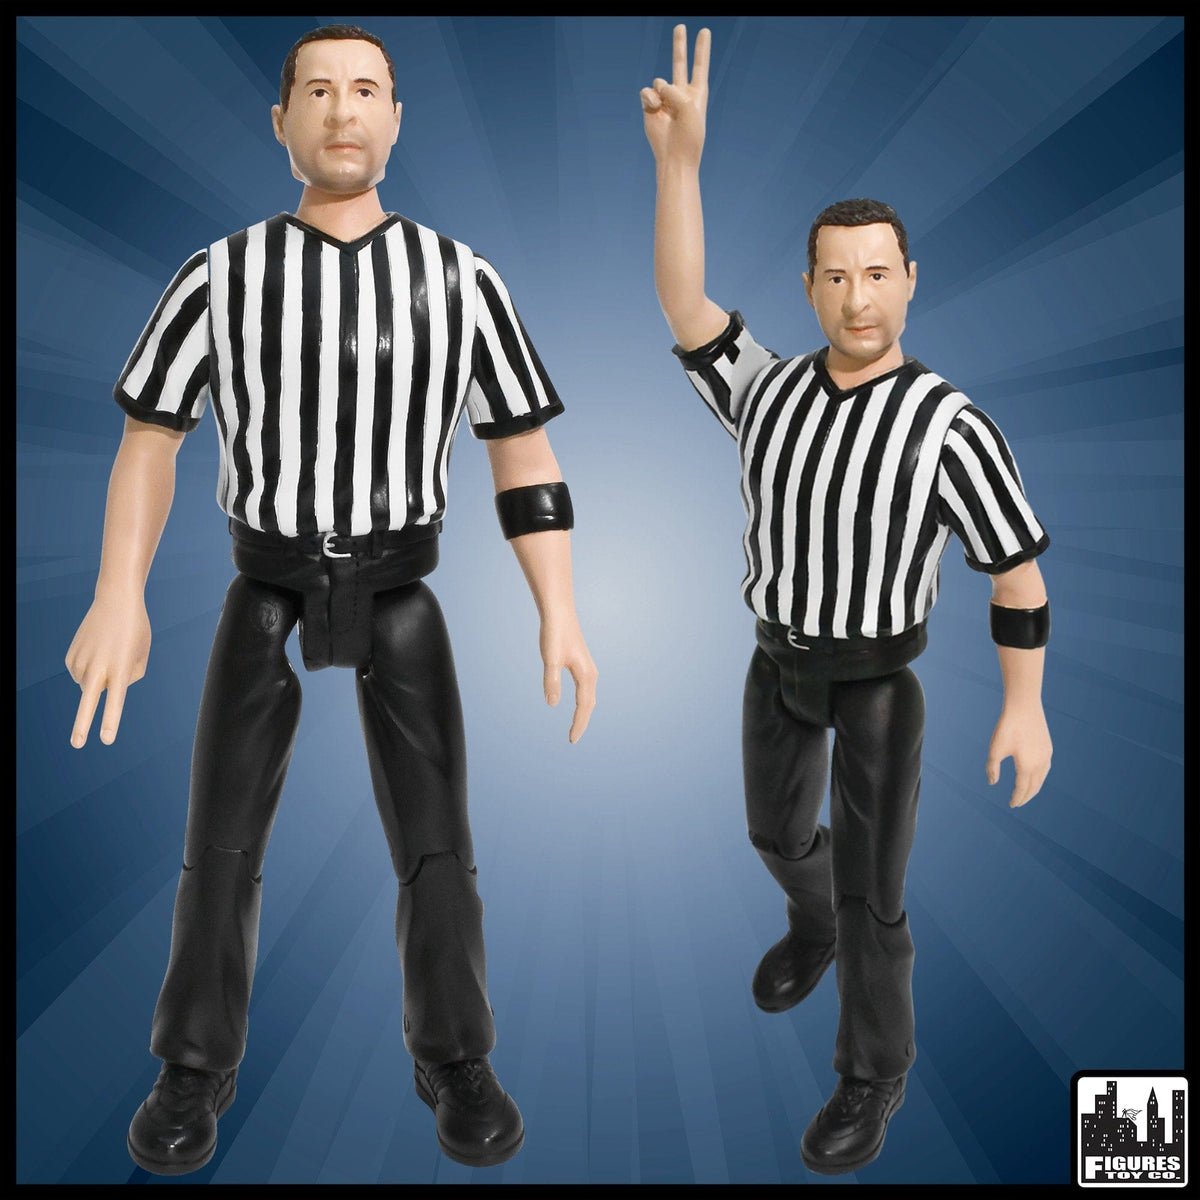 Three Counting and Talking Wrestling Referee Action Figure